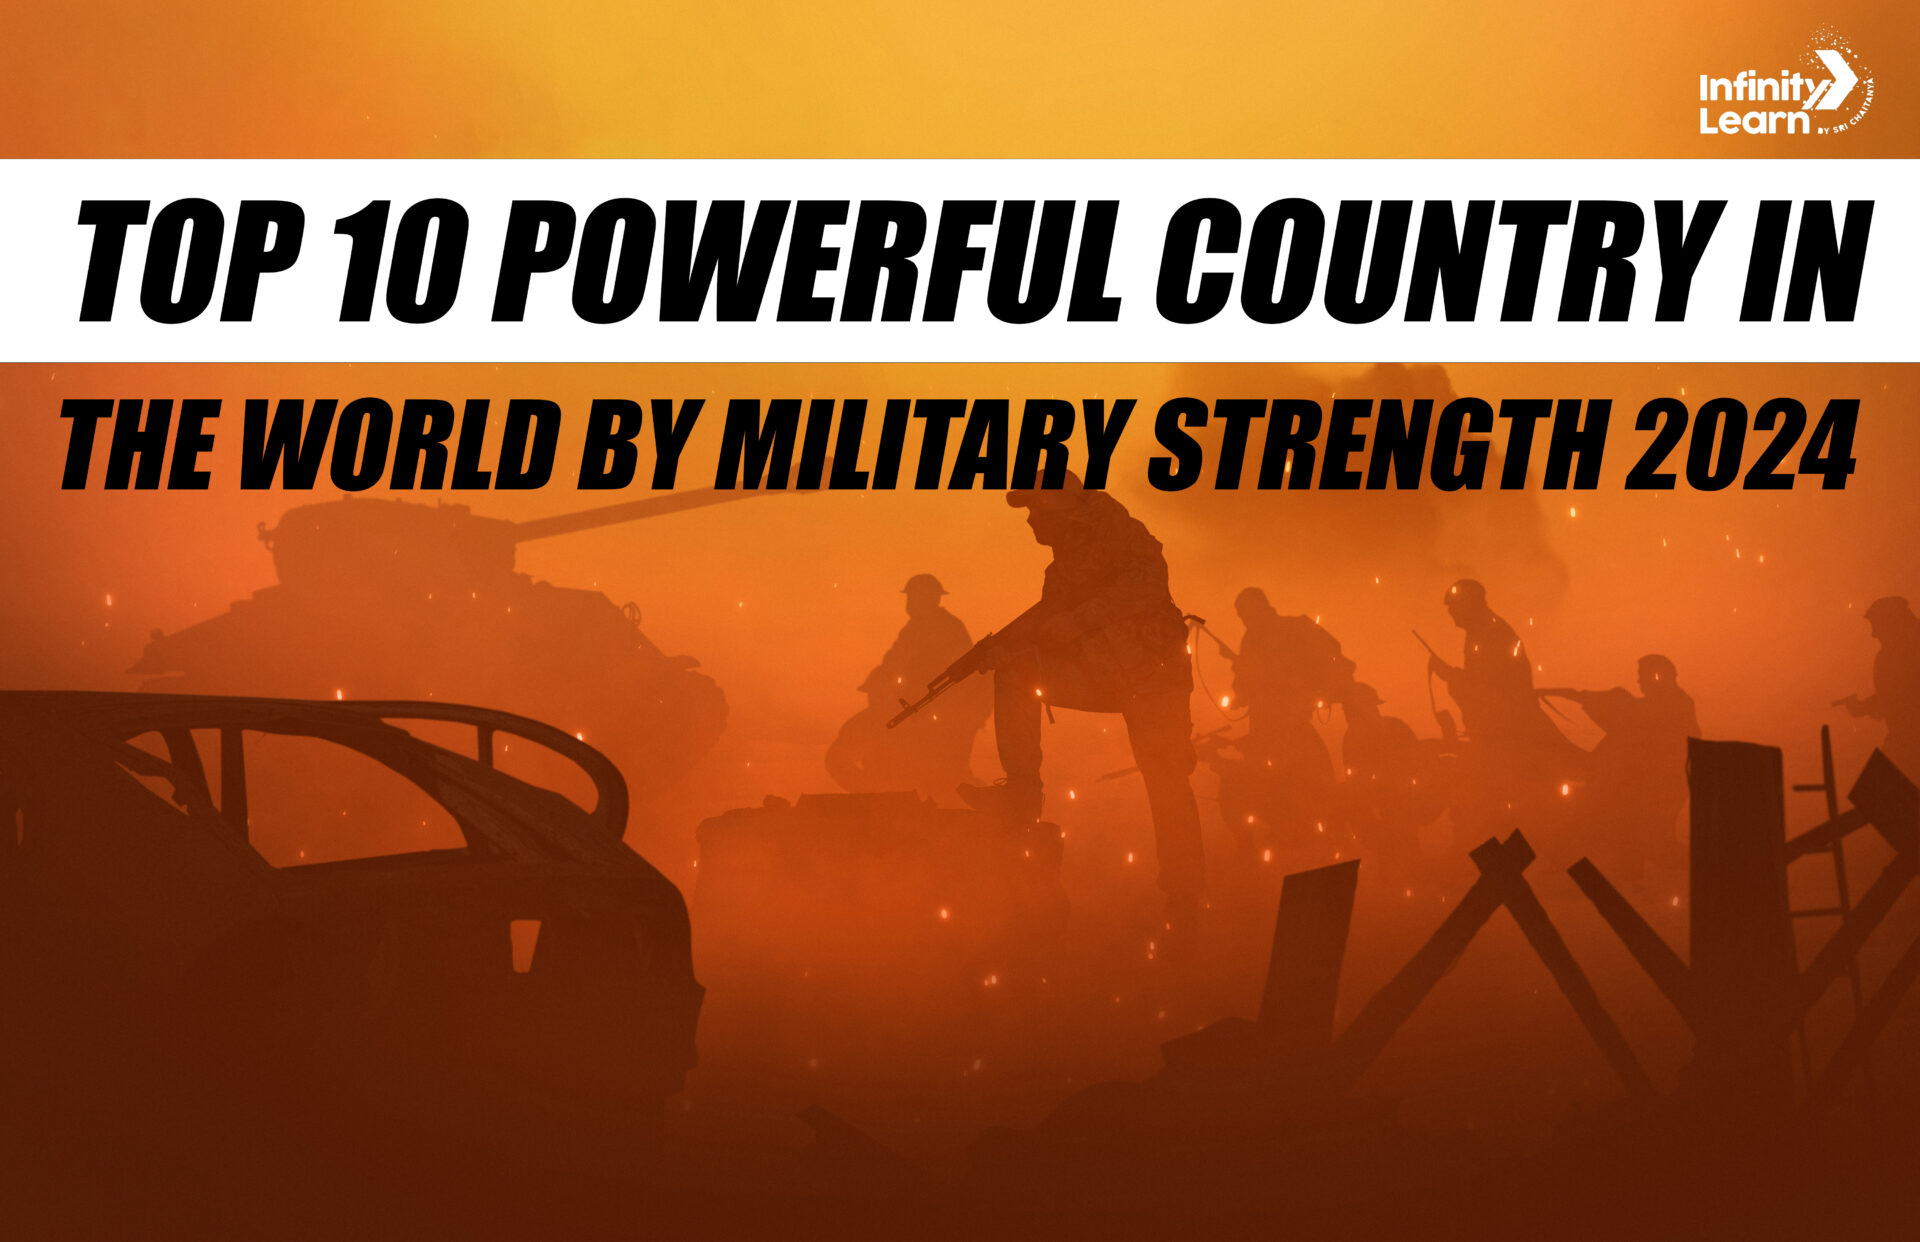 Top 10 Powerful Country in the World by Military Strength 2024